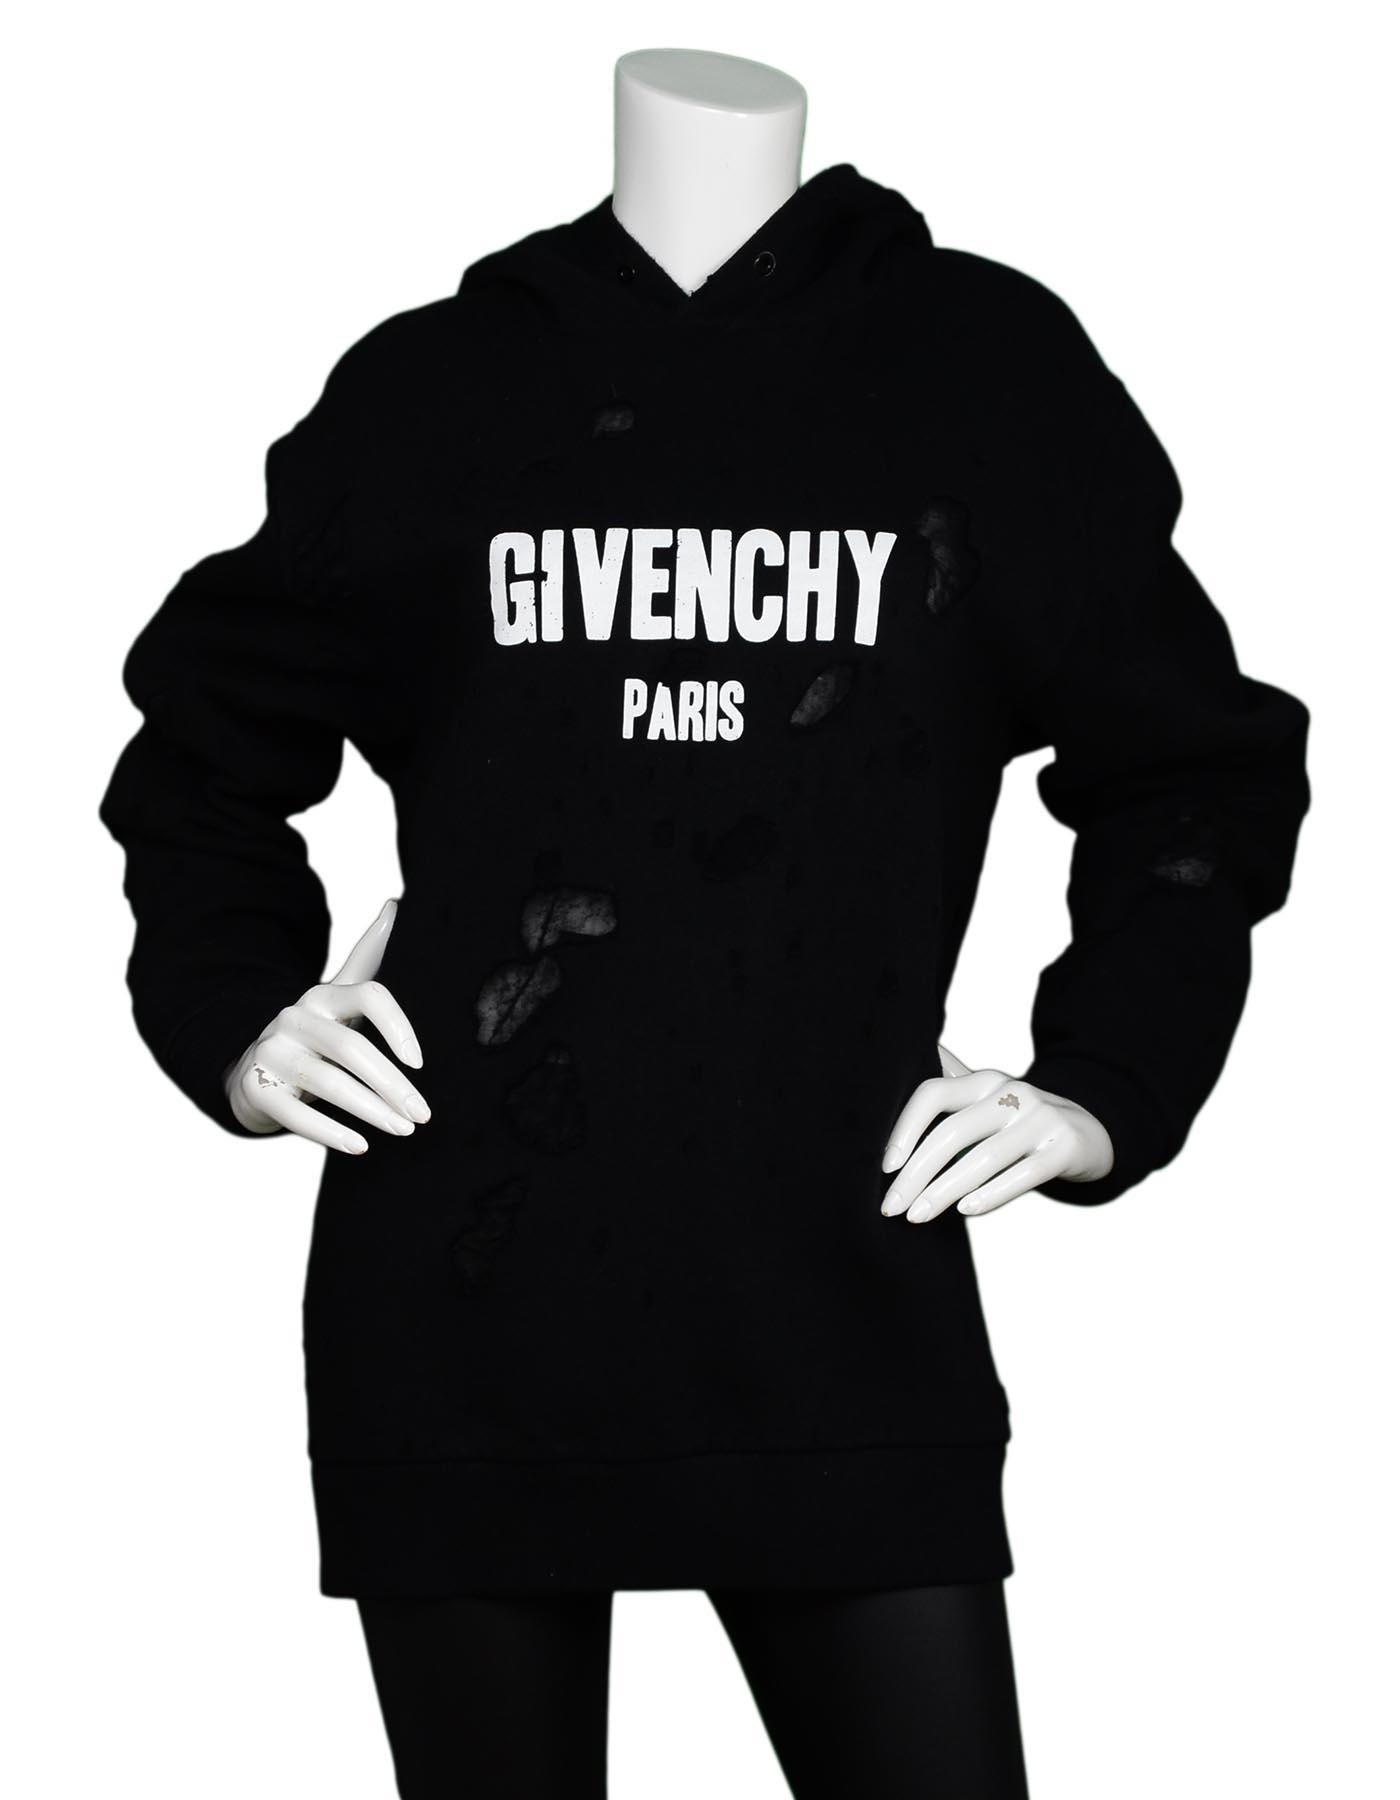 Givenchy Men's Black Distressed Logo-Print Cotton Hoodie Sz M

Made In: Portugal 
Year of Production: 2017
Color: Black, white
Materials: Fabric 1: 100% cotton, fabric 2: 100% polyester, fabric 3: 100% viscose 
Lining: 100% cotton
Opening/Closure: